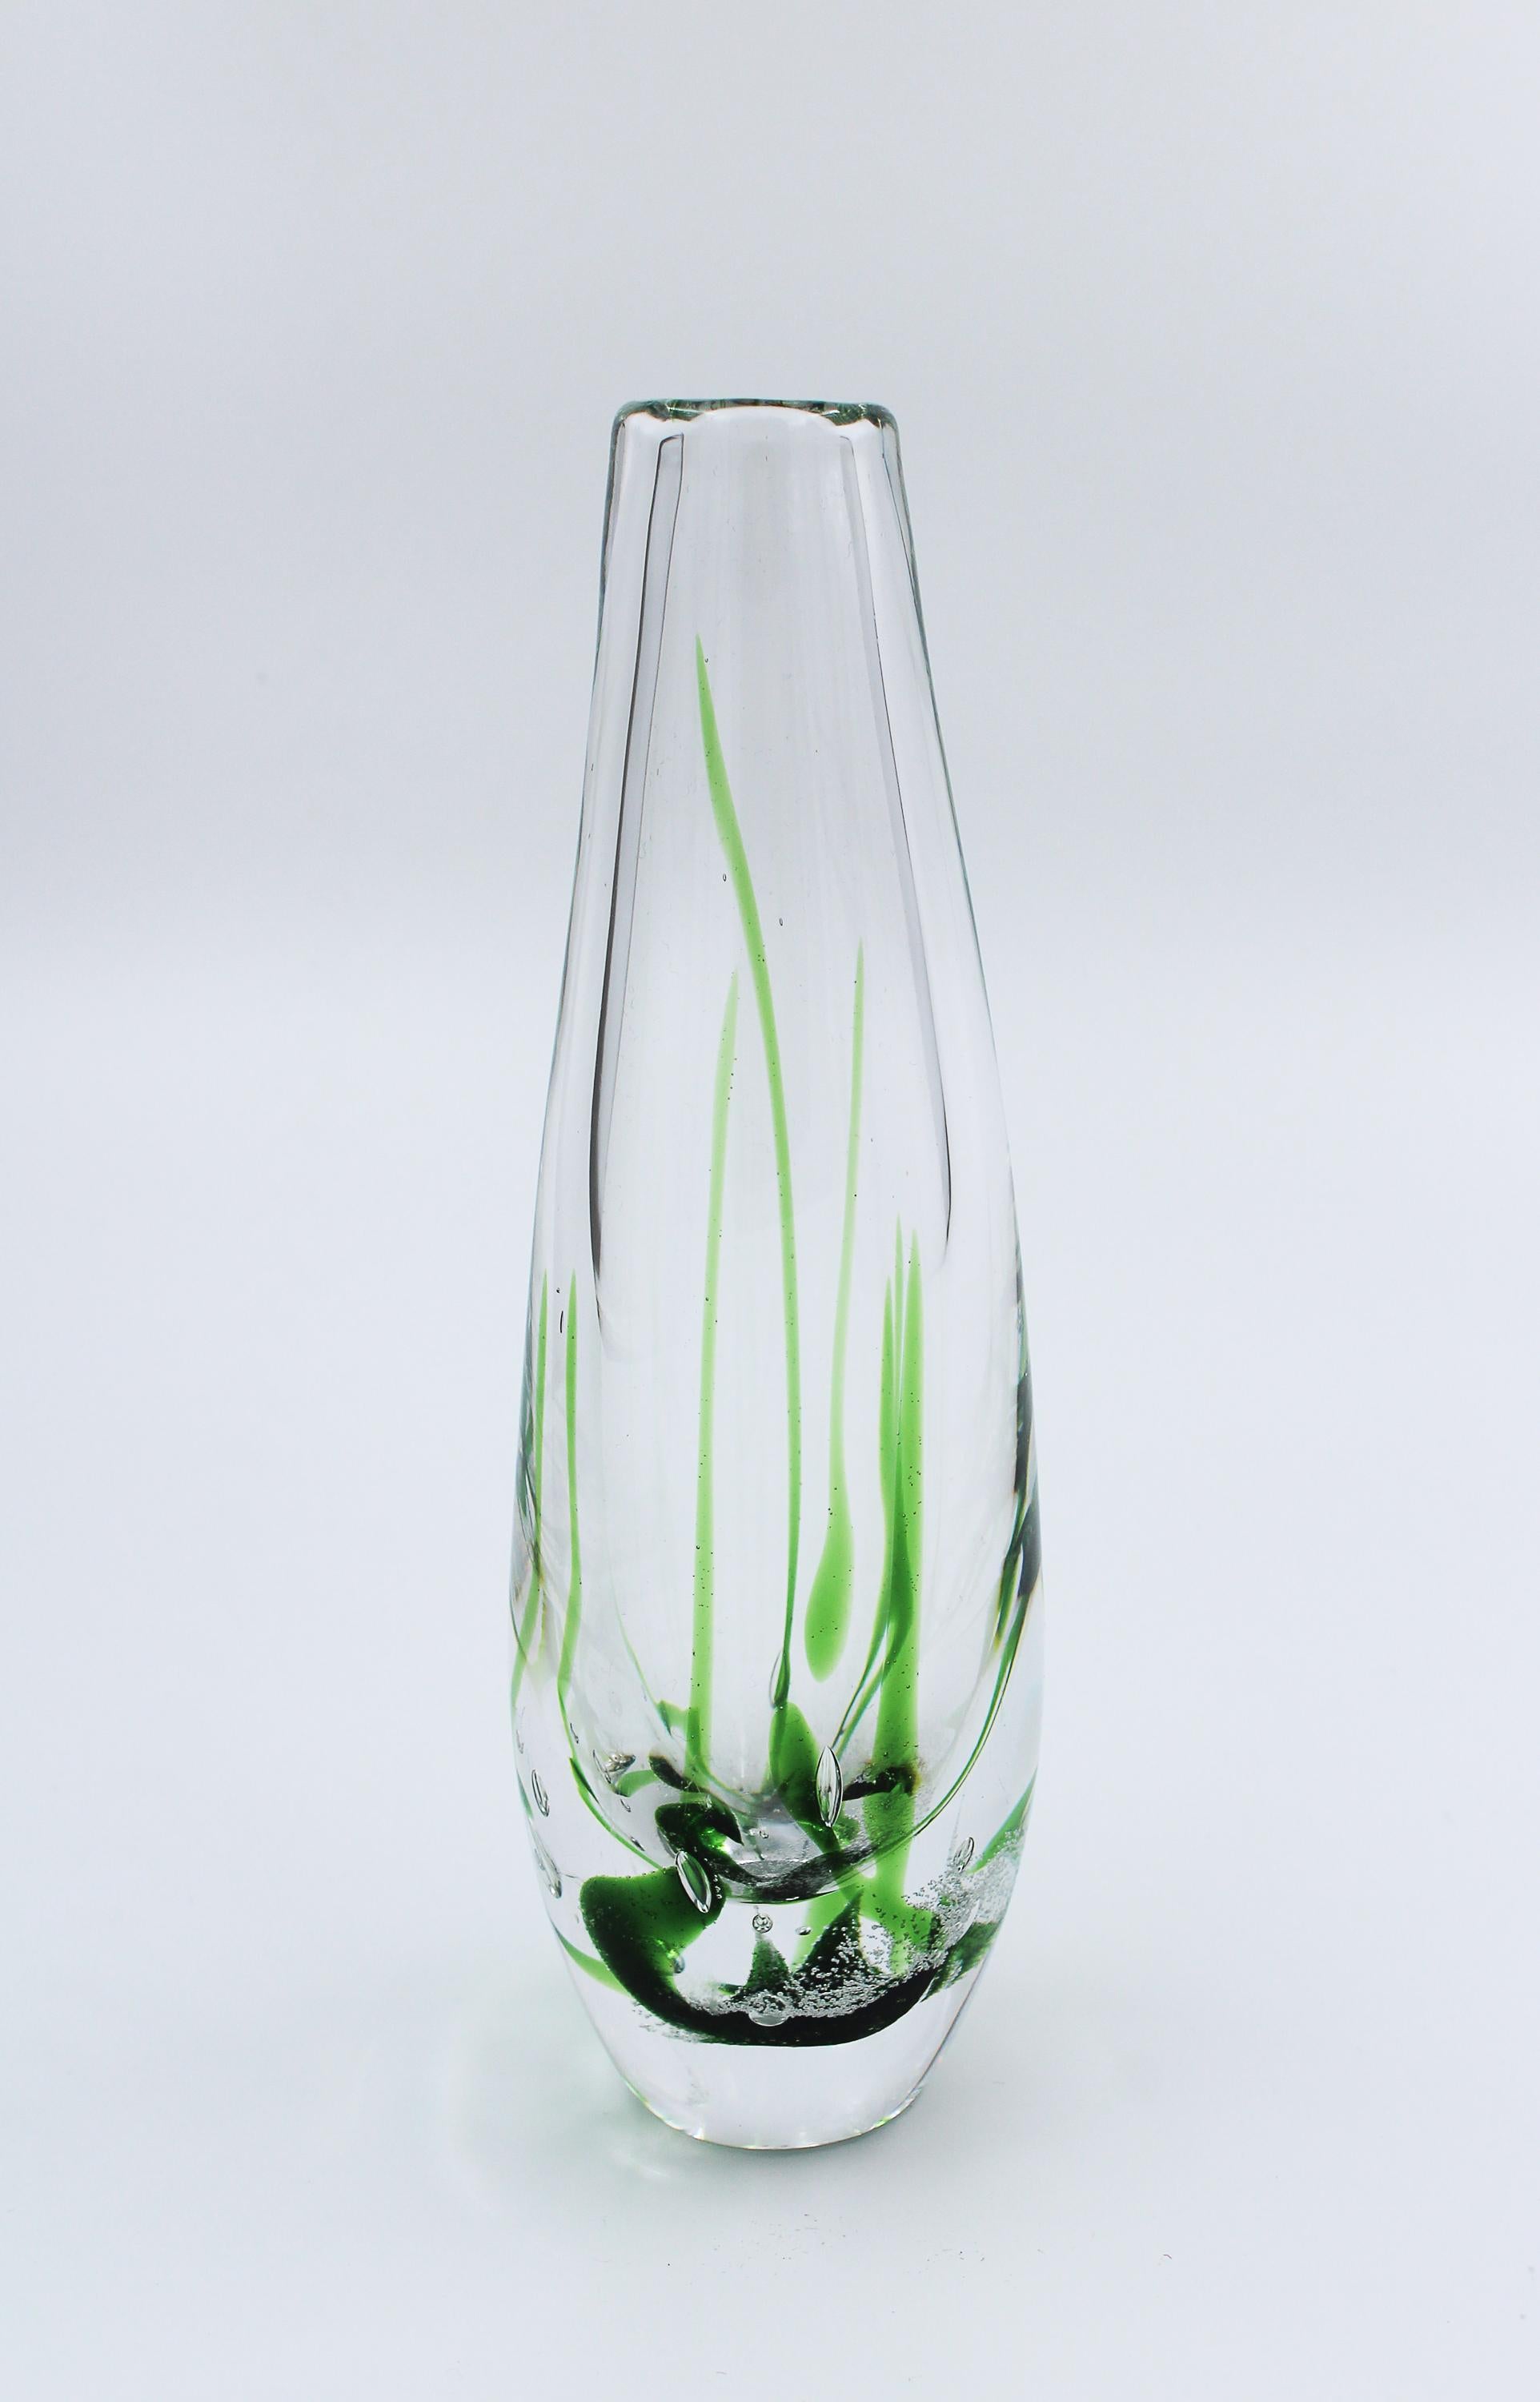 Midcentury Vicke Lindstrand Glass Vase by Kosta, 1960s In Excellent Condition For Sale In Malmo, SE